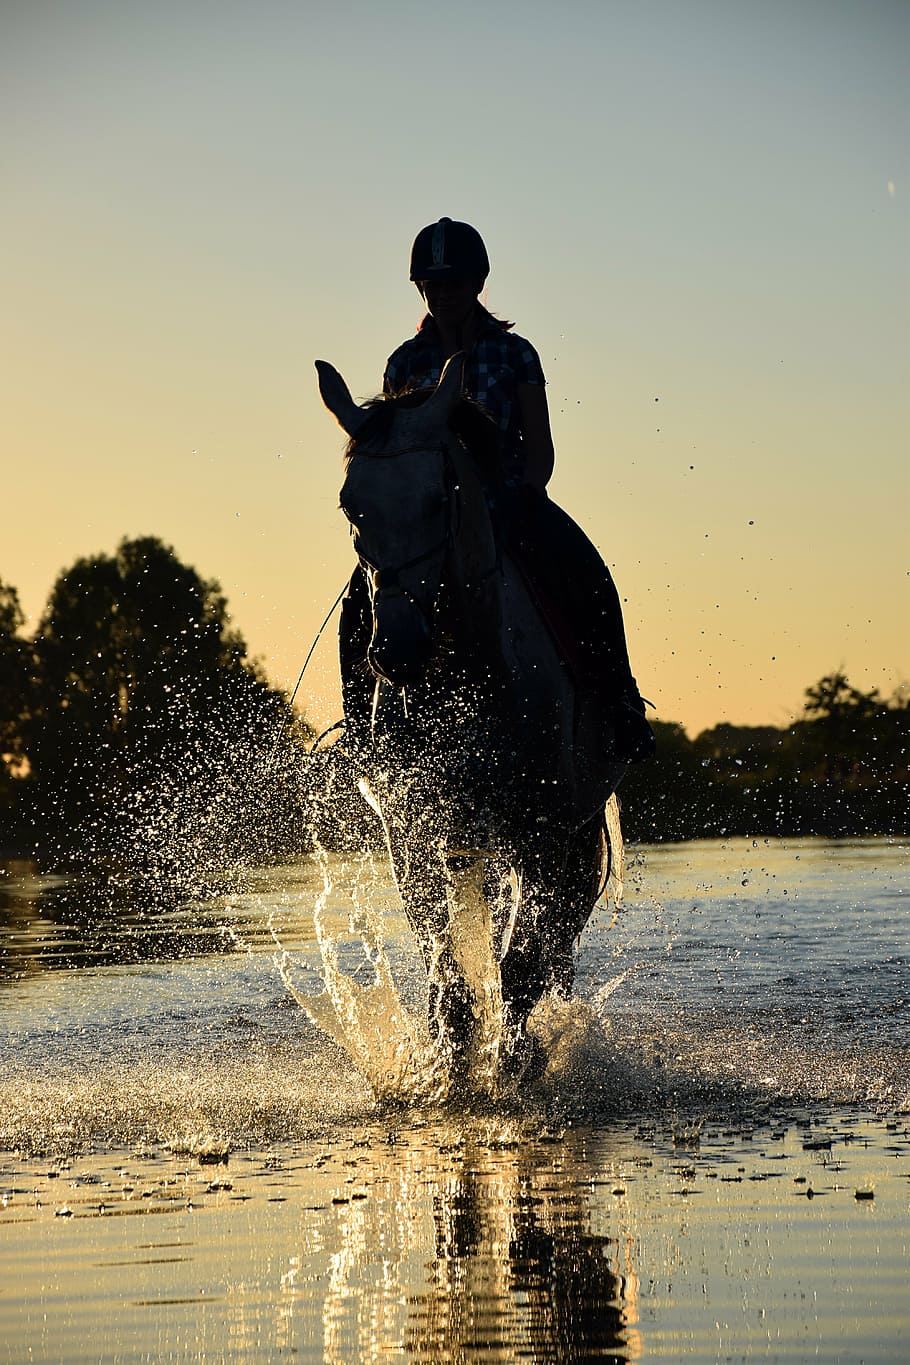 silhouette, person rinding horse, horse, ride, water, sea, sunset, evening, outdoors, men